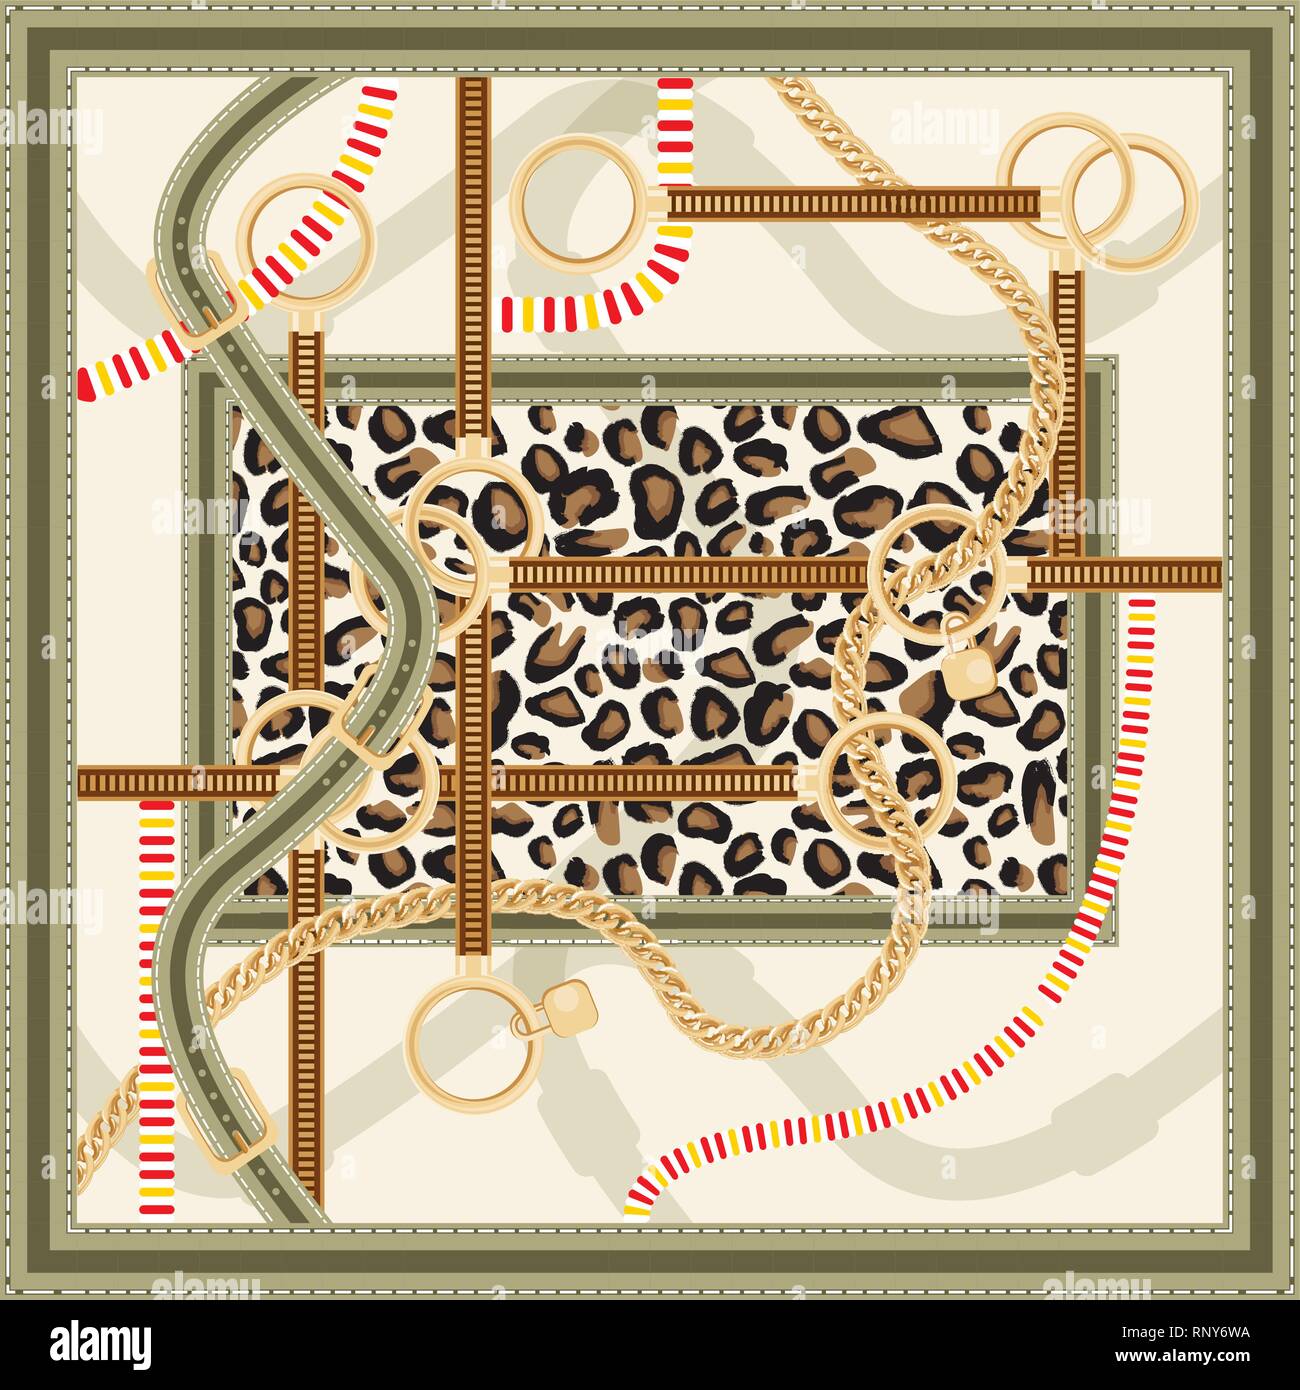 Pattern with Golden Chain, Belts and Leopard Print for Fabric Design. Vector Illustration. Silk Scarf Design. Stock Vector